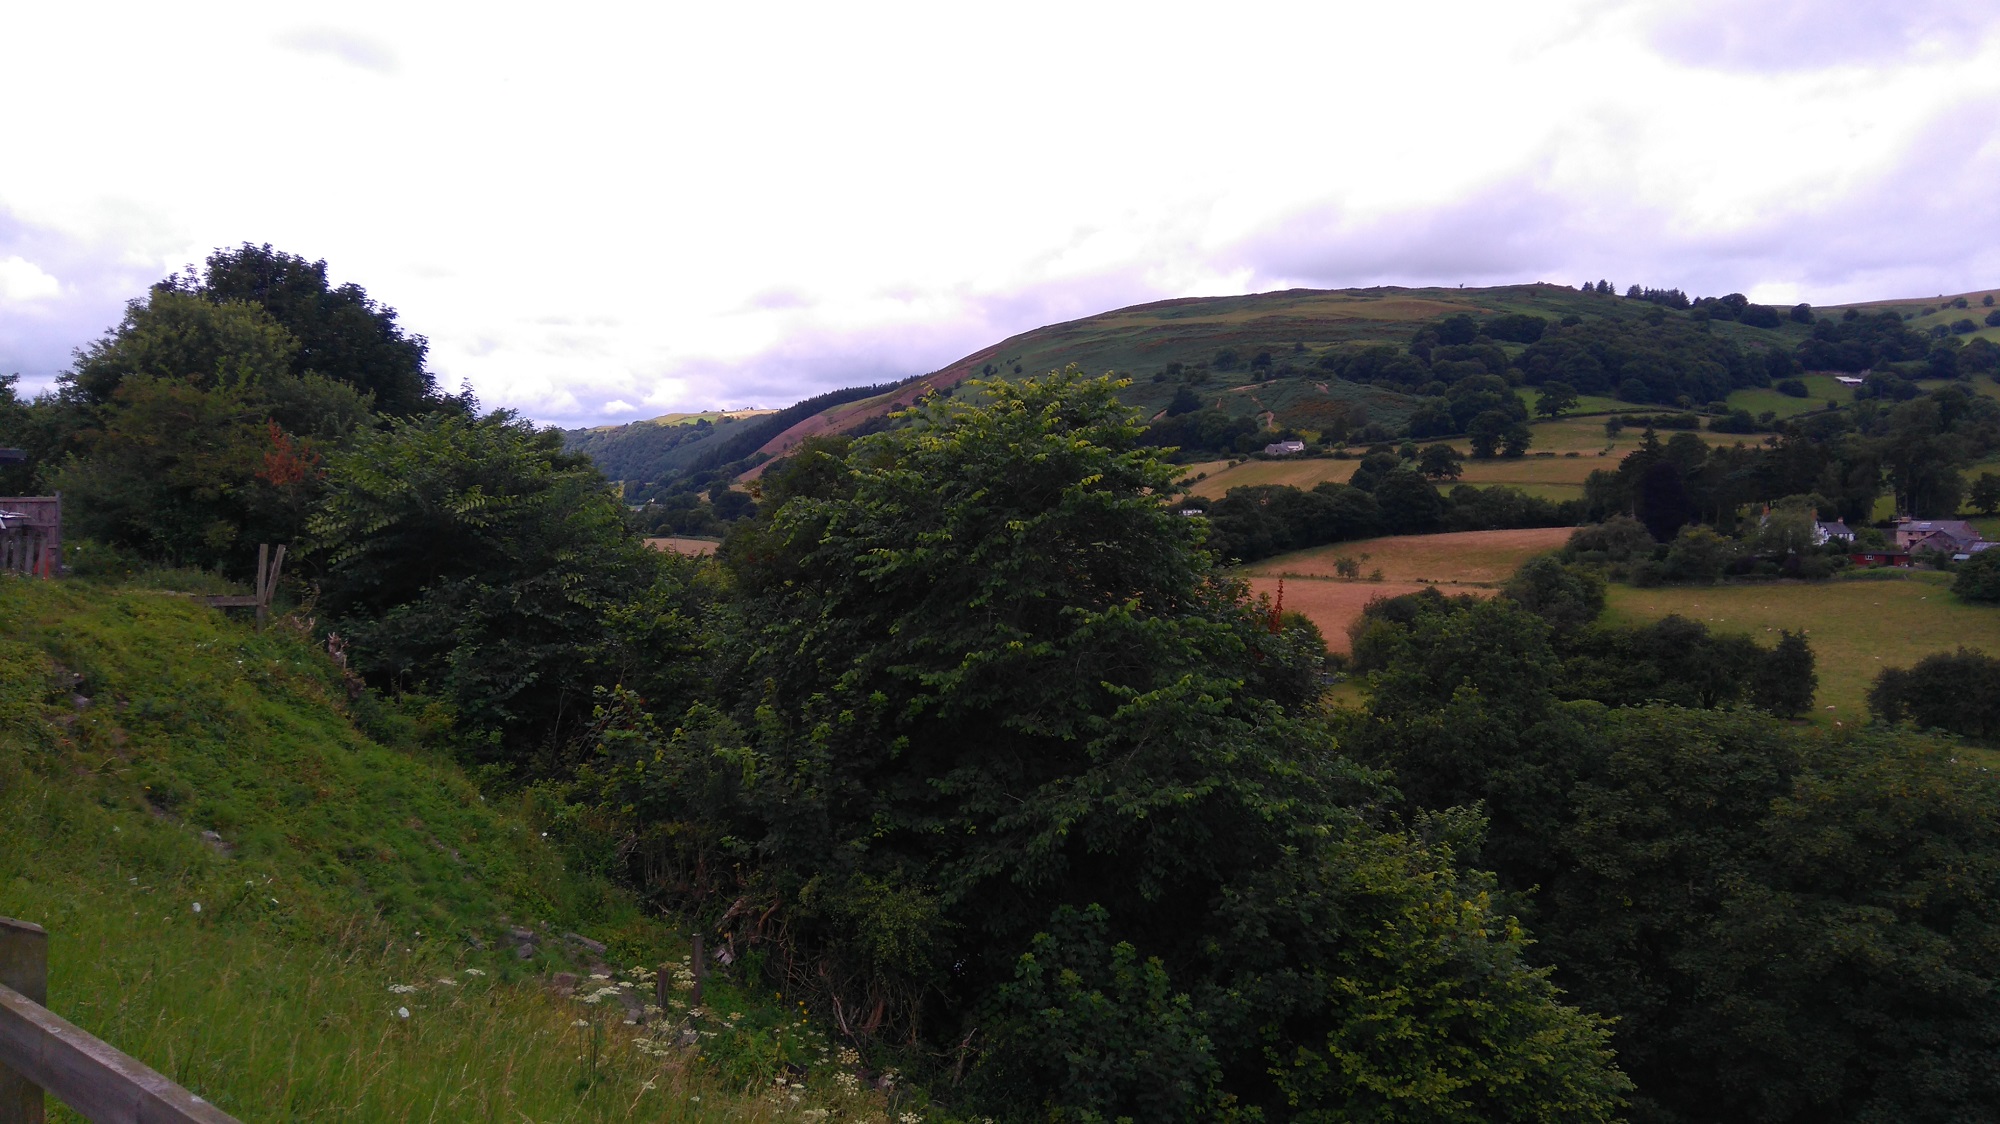 Rugged rural hills with fields, and trees in the foreground, viewed under a cloudy summer sky. Near Llangollen, Wales.